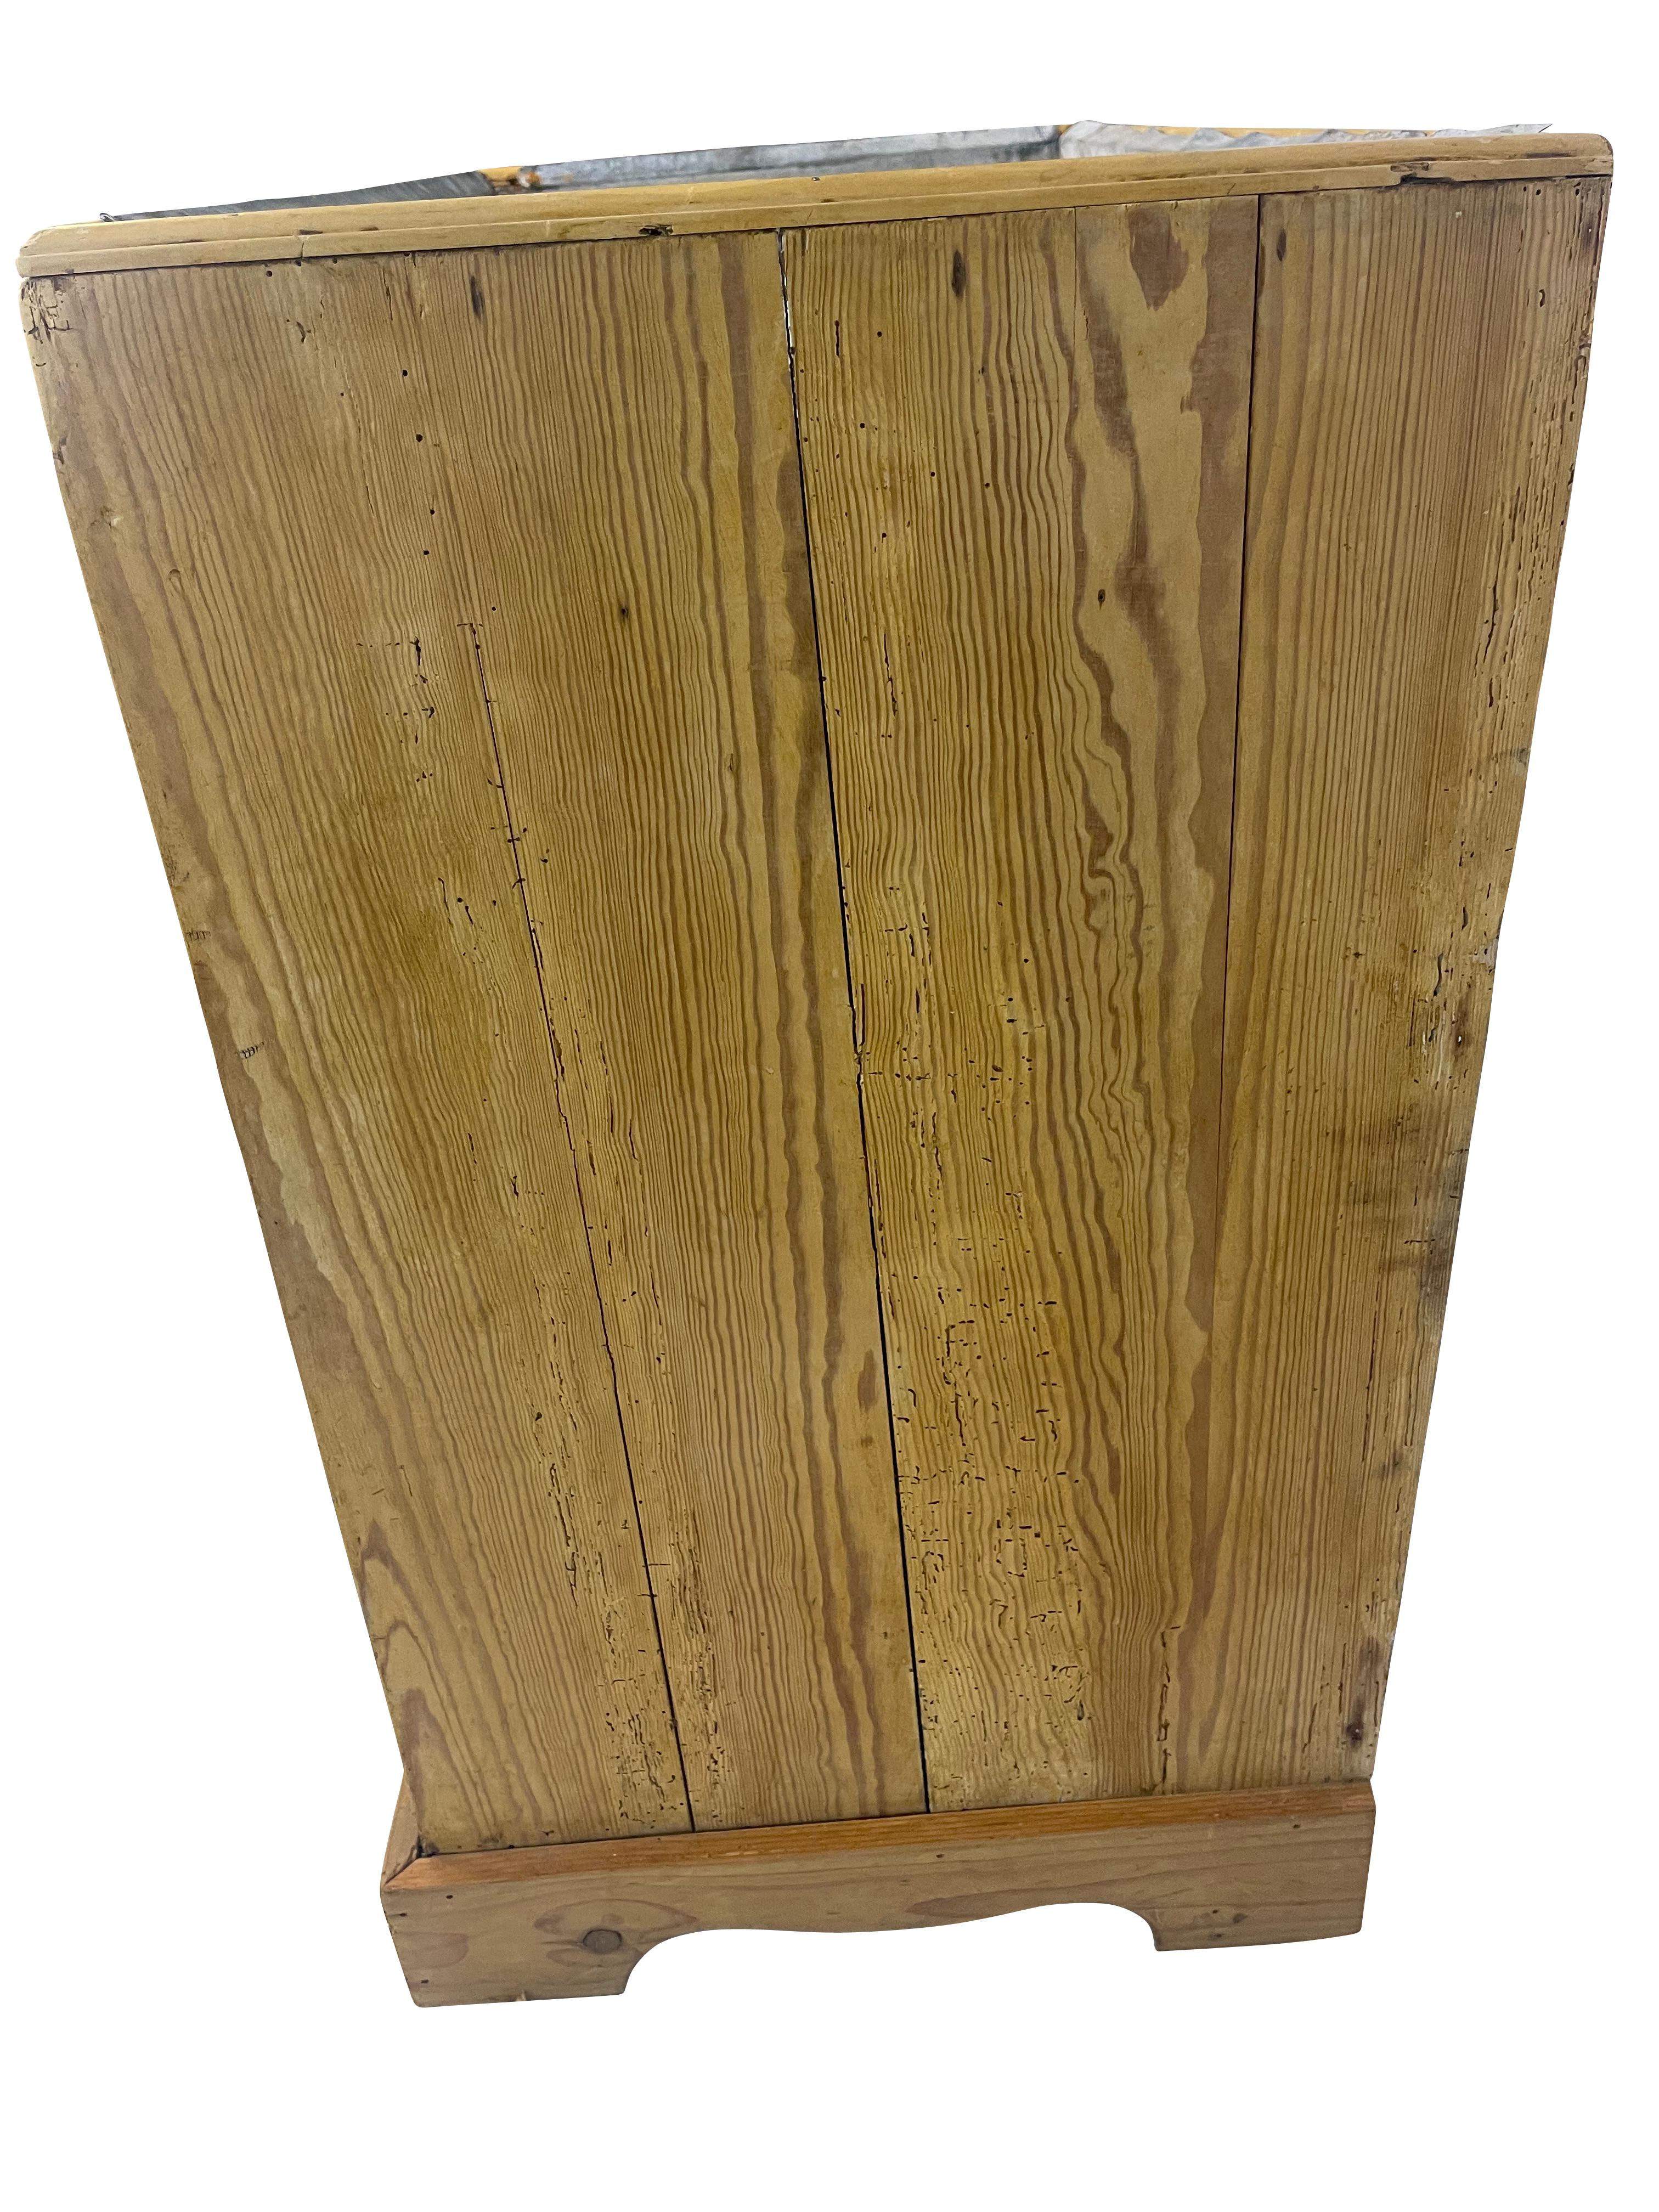 English Pine Dry Sink/ Plant Stand with Zinc Liner 3